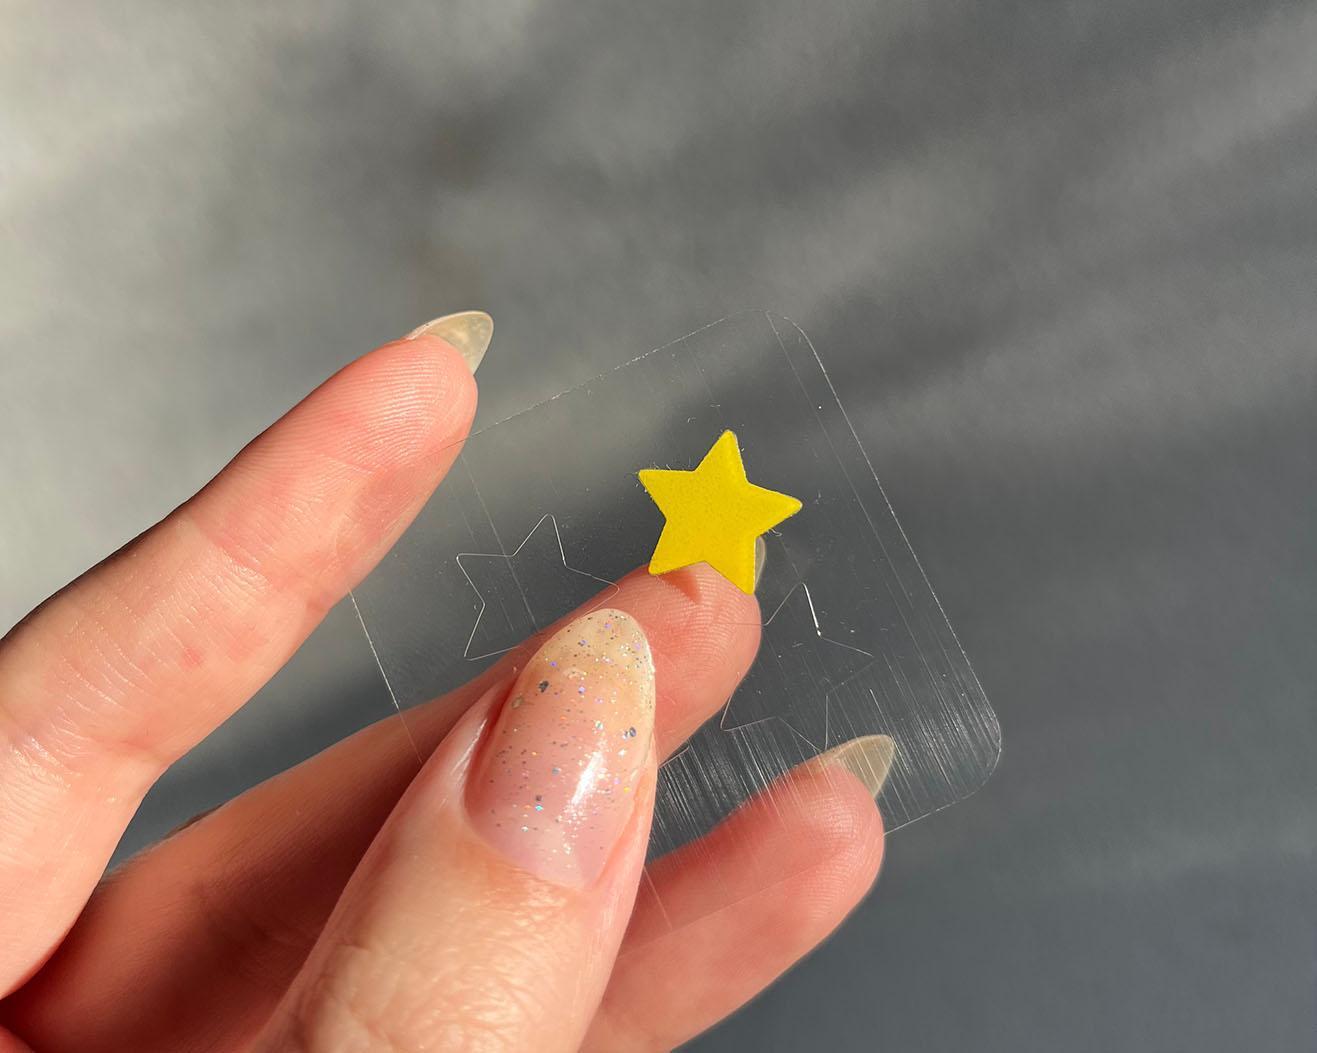 Starface pimple patches: Our review of the Caroline Hirons-approved spot  treatment